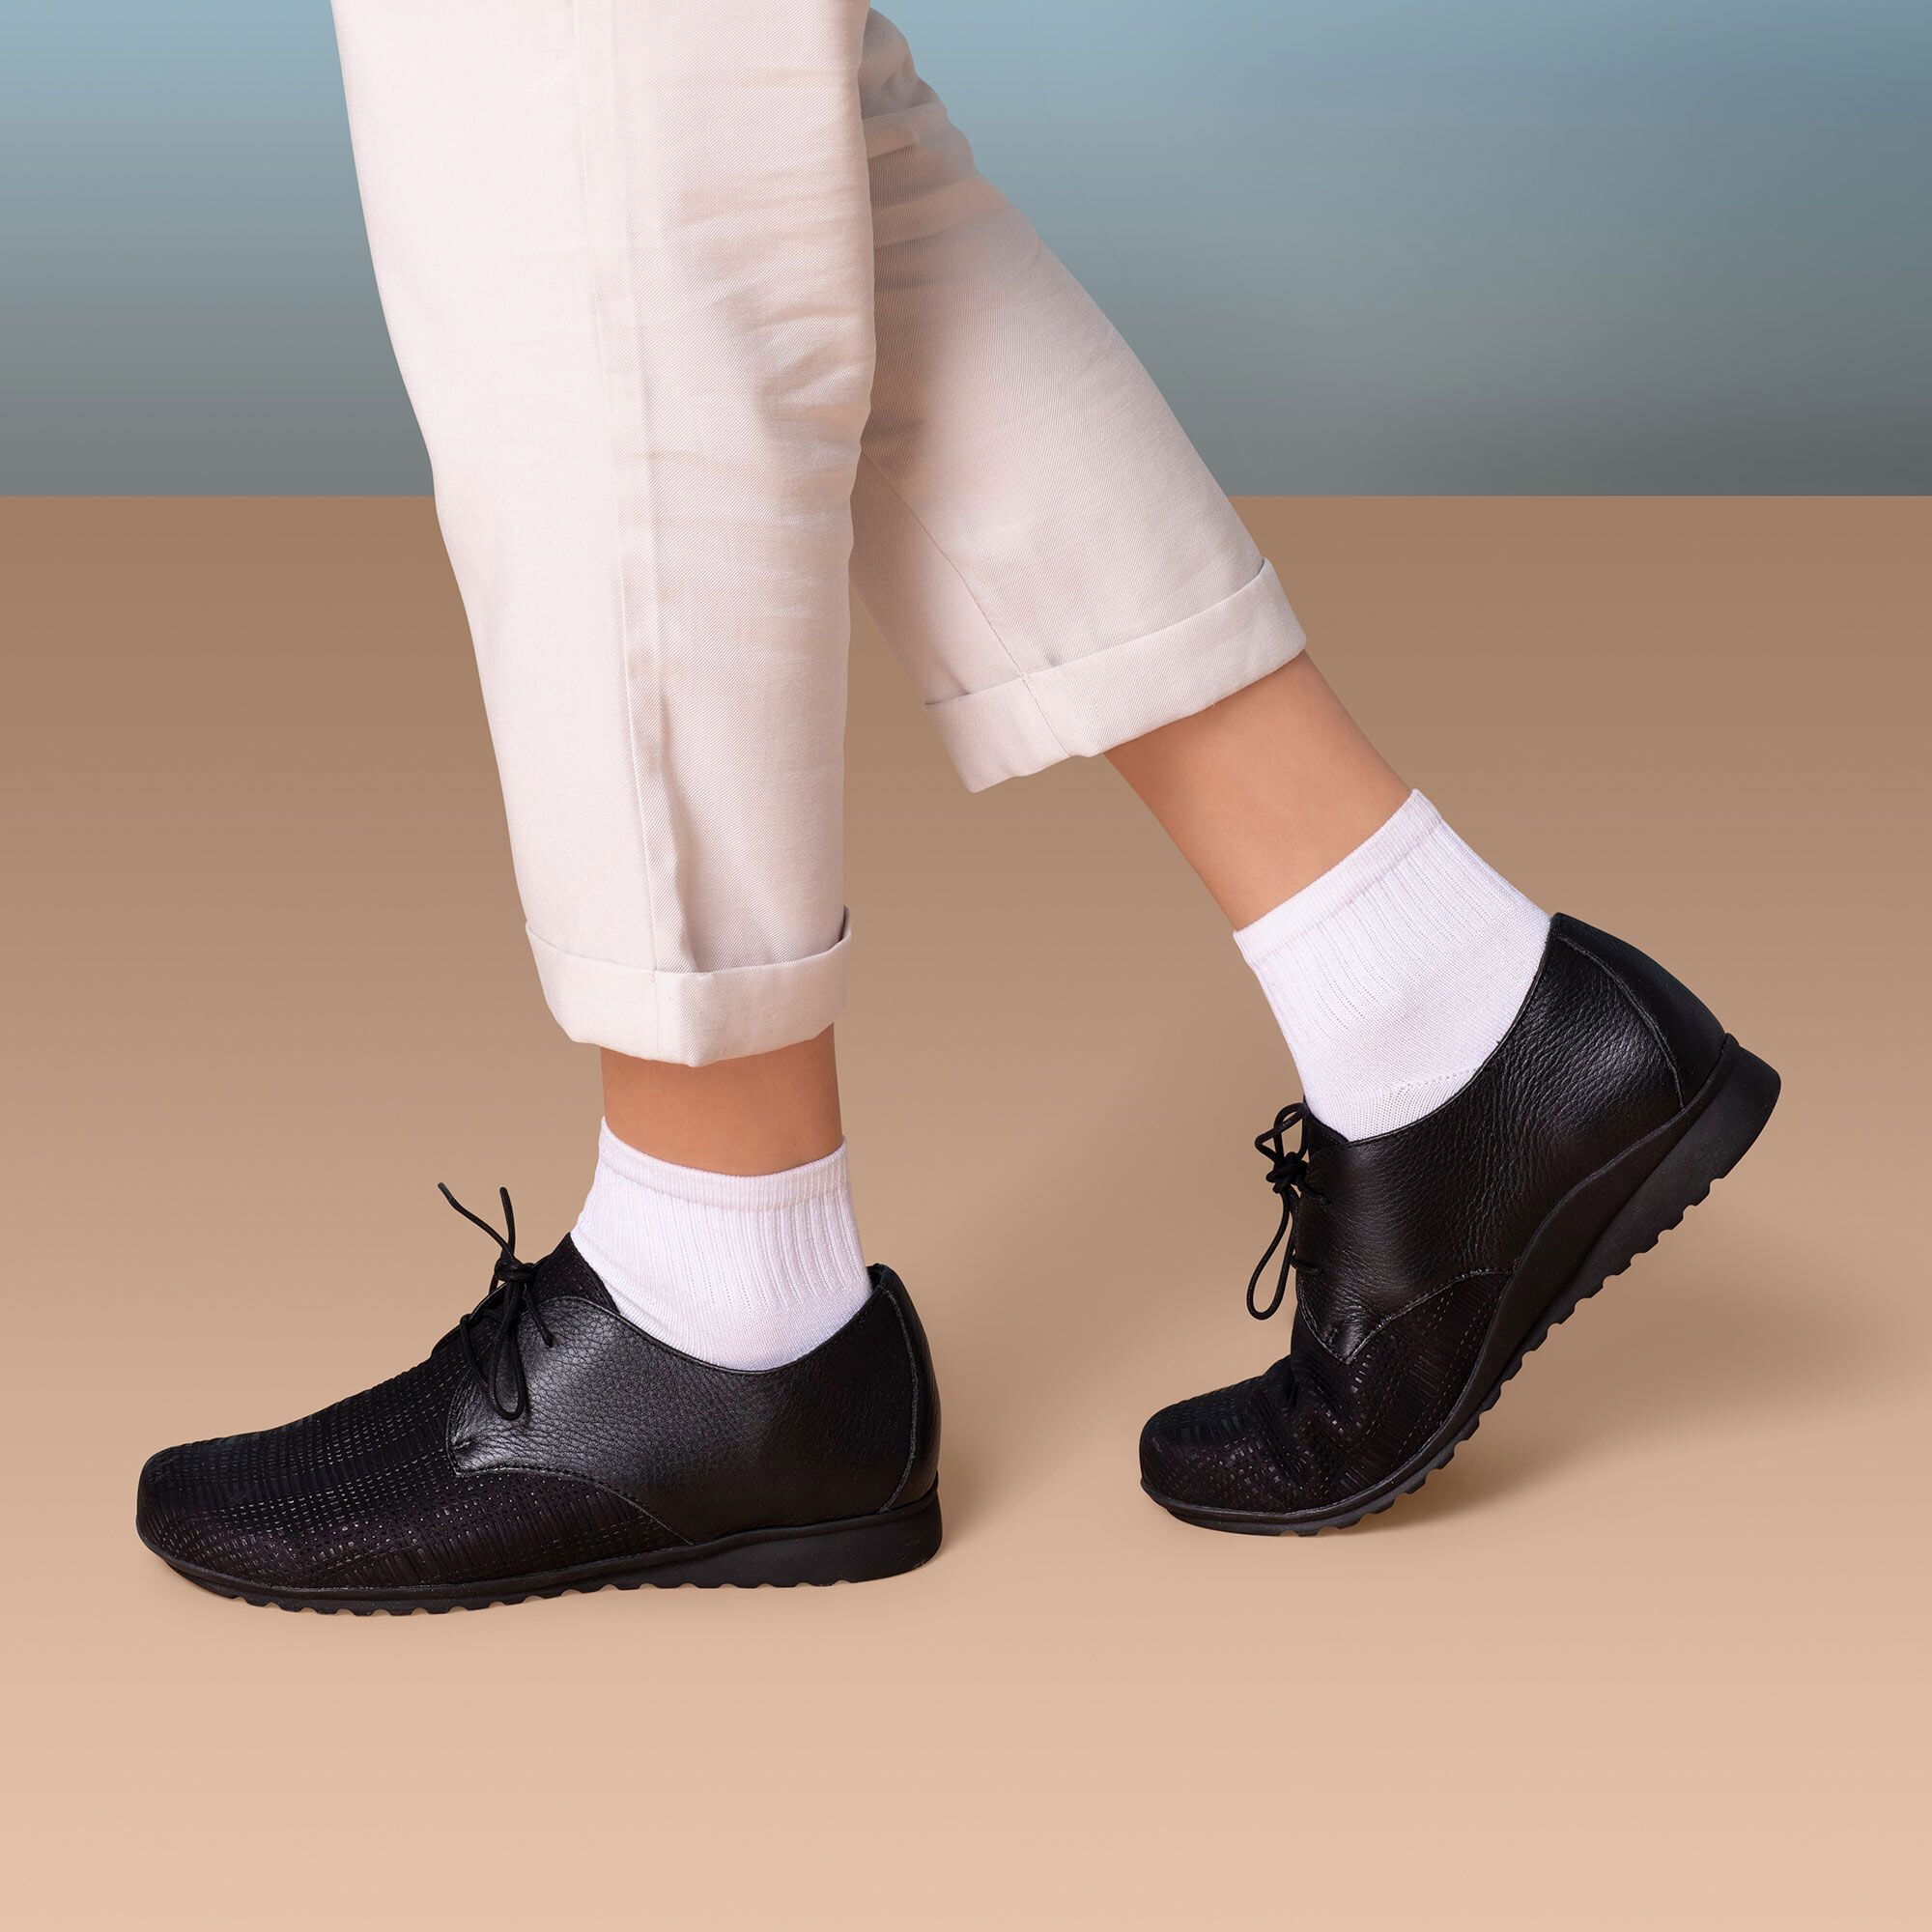 oxford lace up